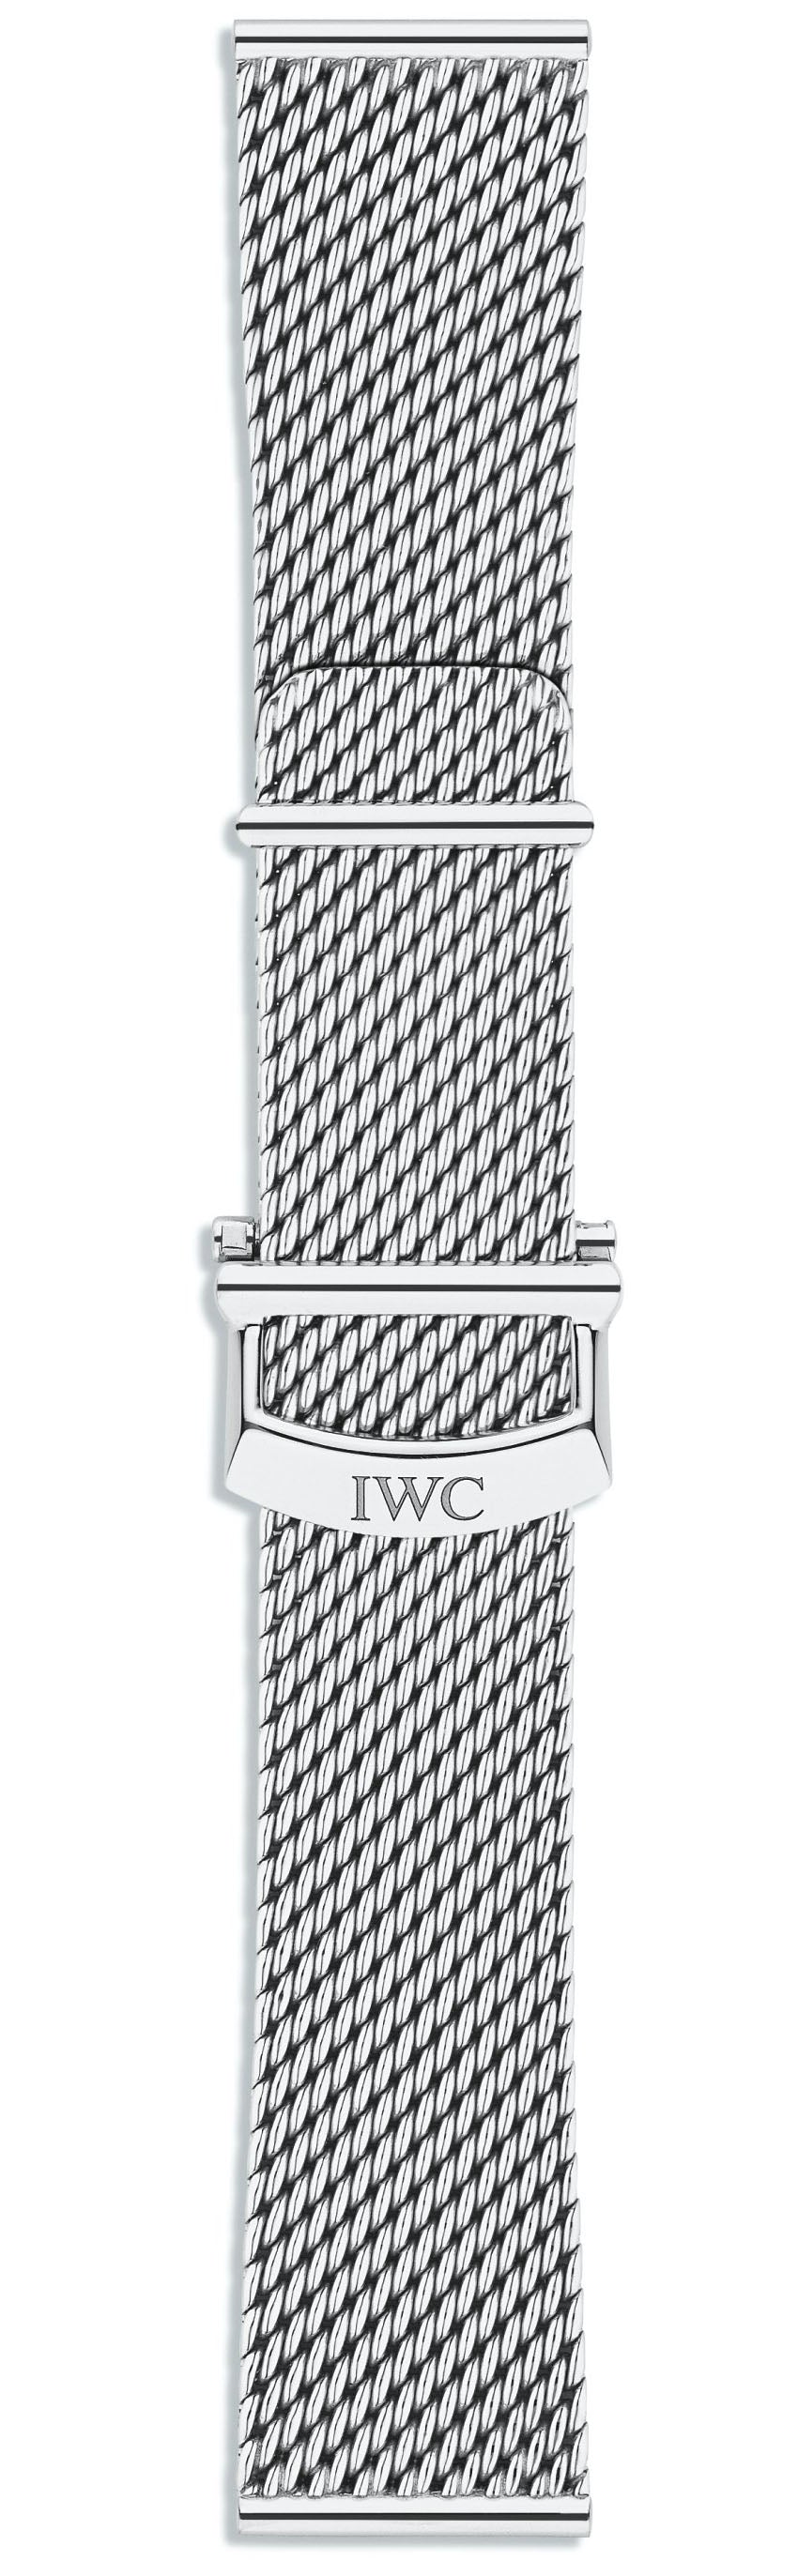 Photos - Watch Strap IWC Strap Bracelet Milanese Steel With Clasp - Silver -S-102 